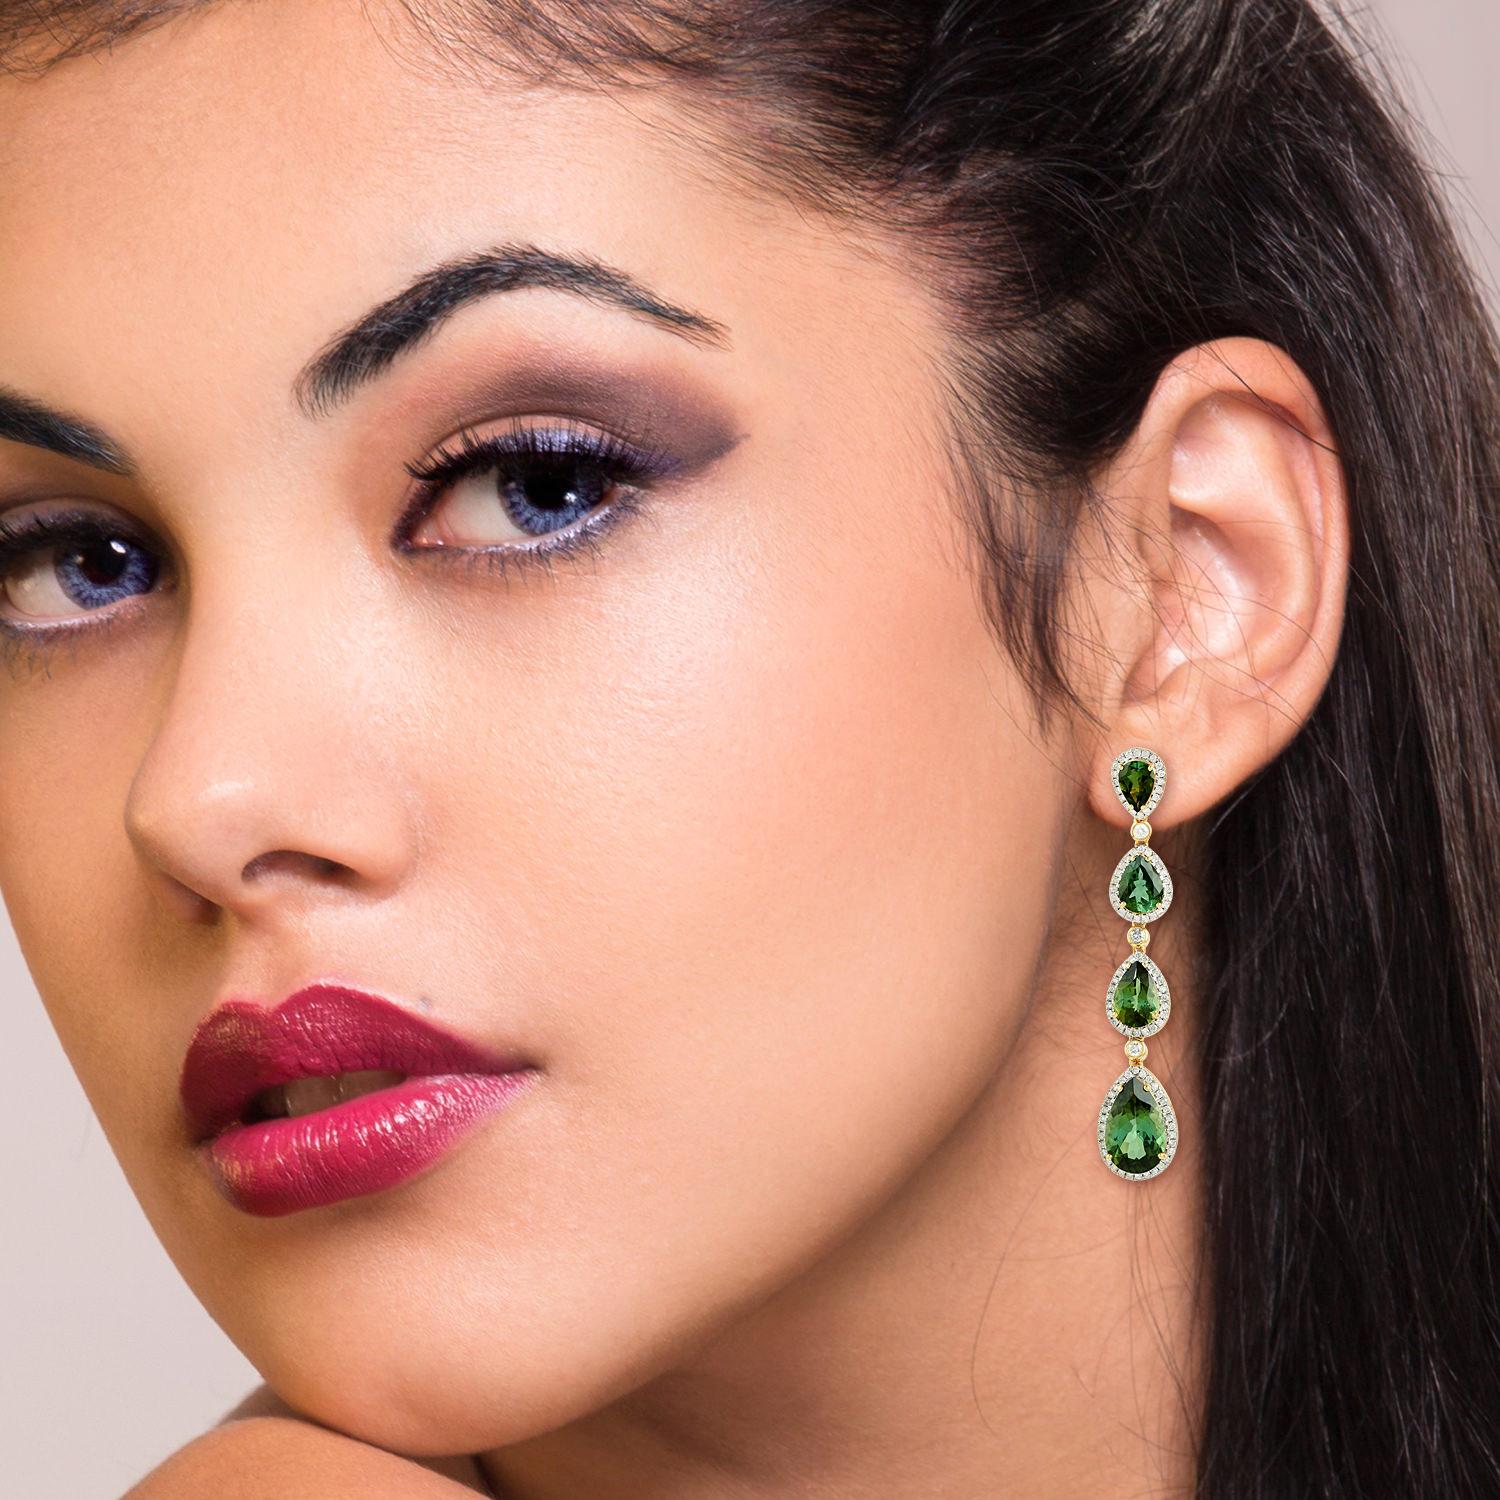 These tourmaline earrings are true stunners. Handcrafted of 18K gold, 13.08 carats tourmaline & illuminated with 1.36 carats of diamonds

FOLLOW  MEGHNA JEWELS storefront to view the latest collection & exclusive pieces.  Meghna Jewels is proudly